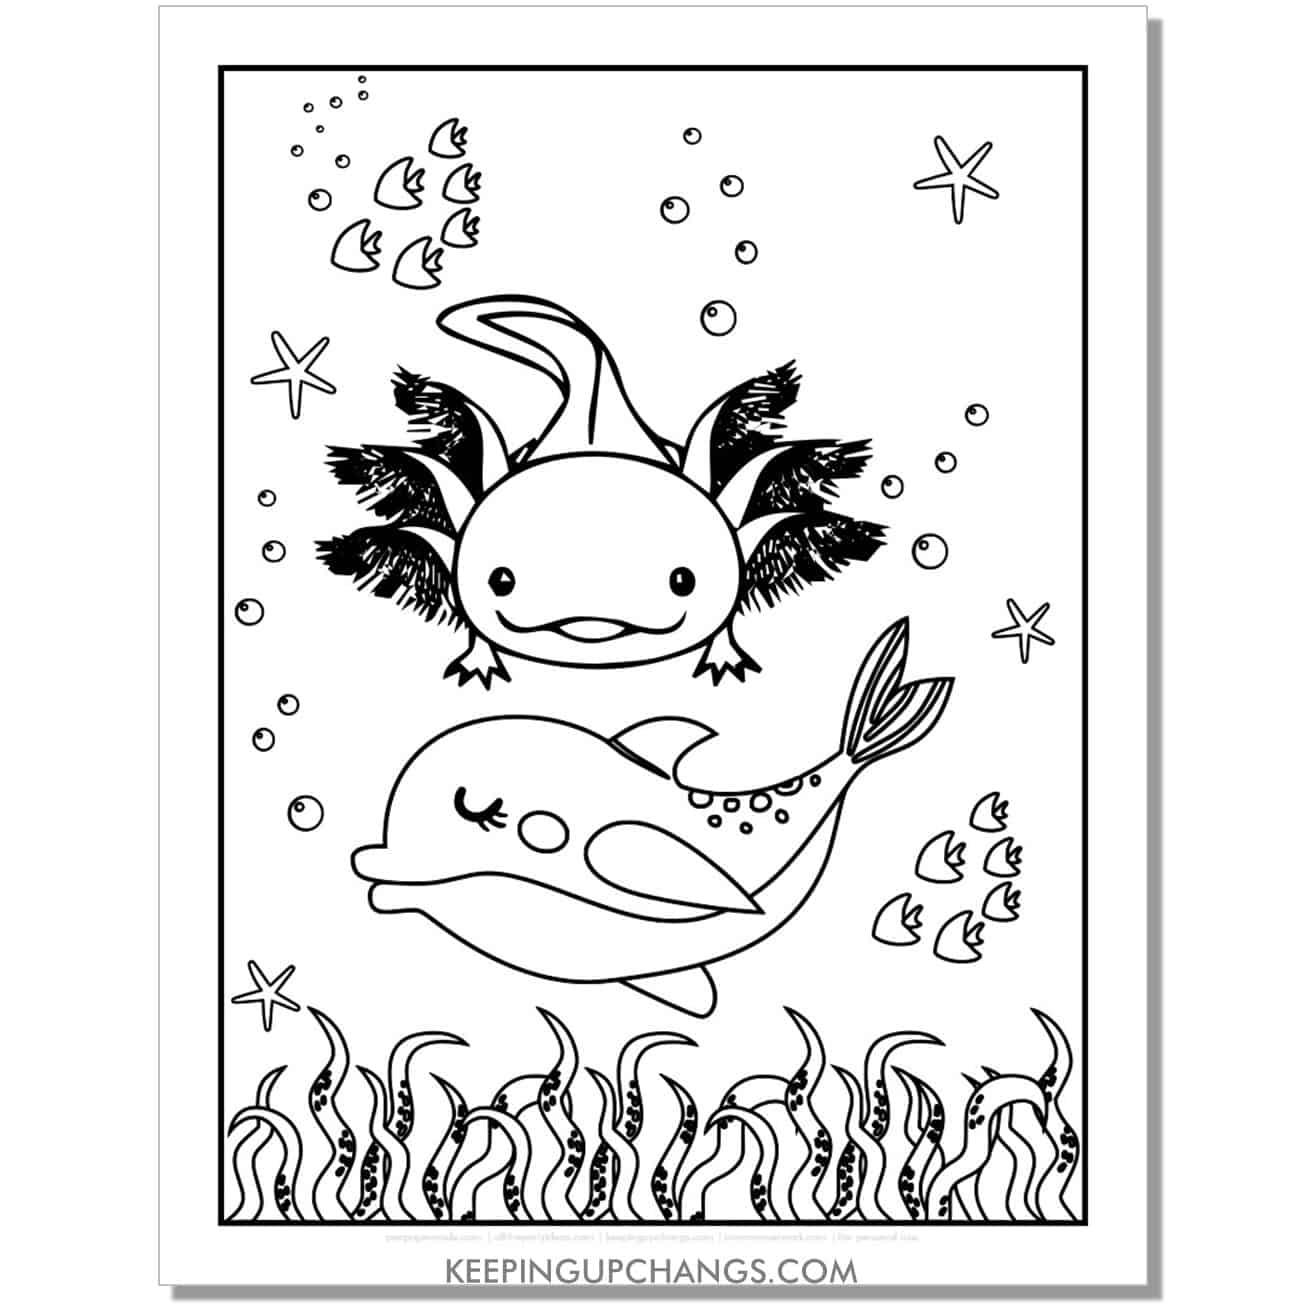 free swimming axolotl coloring page with dolphin, seaweed.